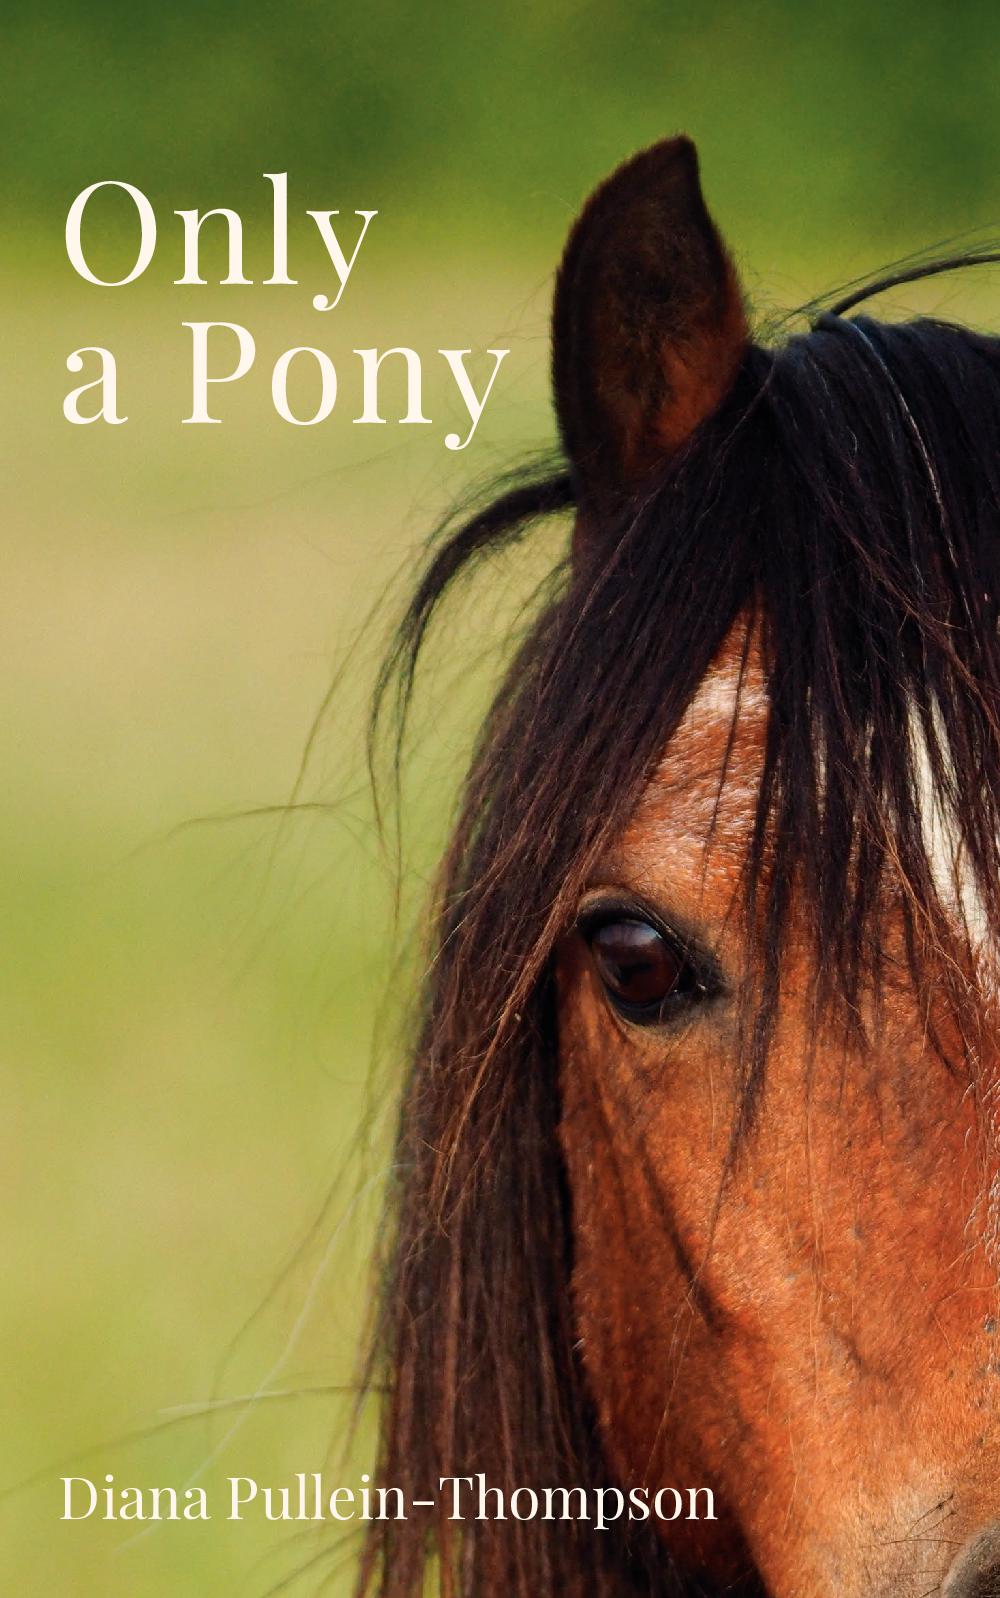 Diana Pullein-Thompson: Only a Pony (paperback)